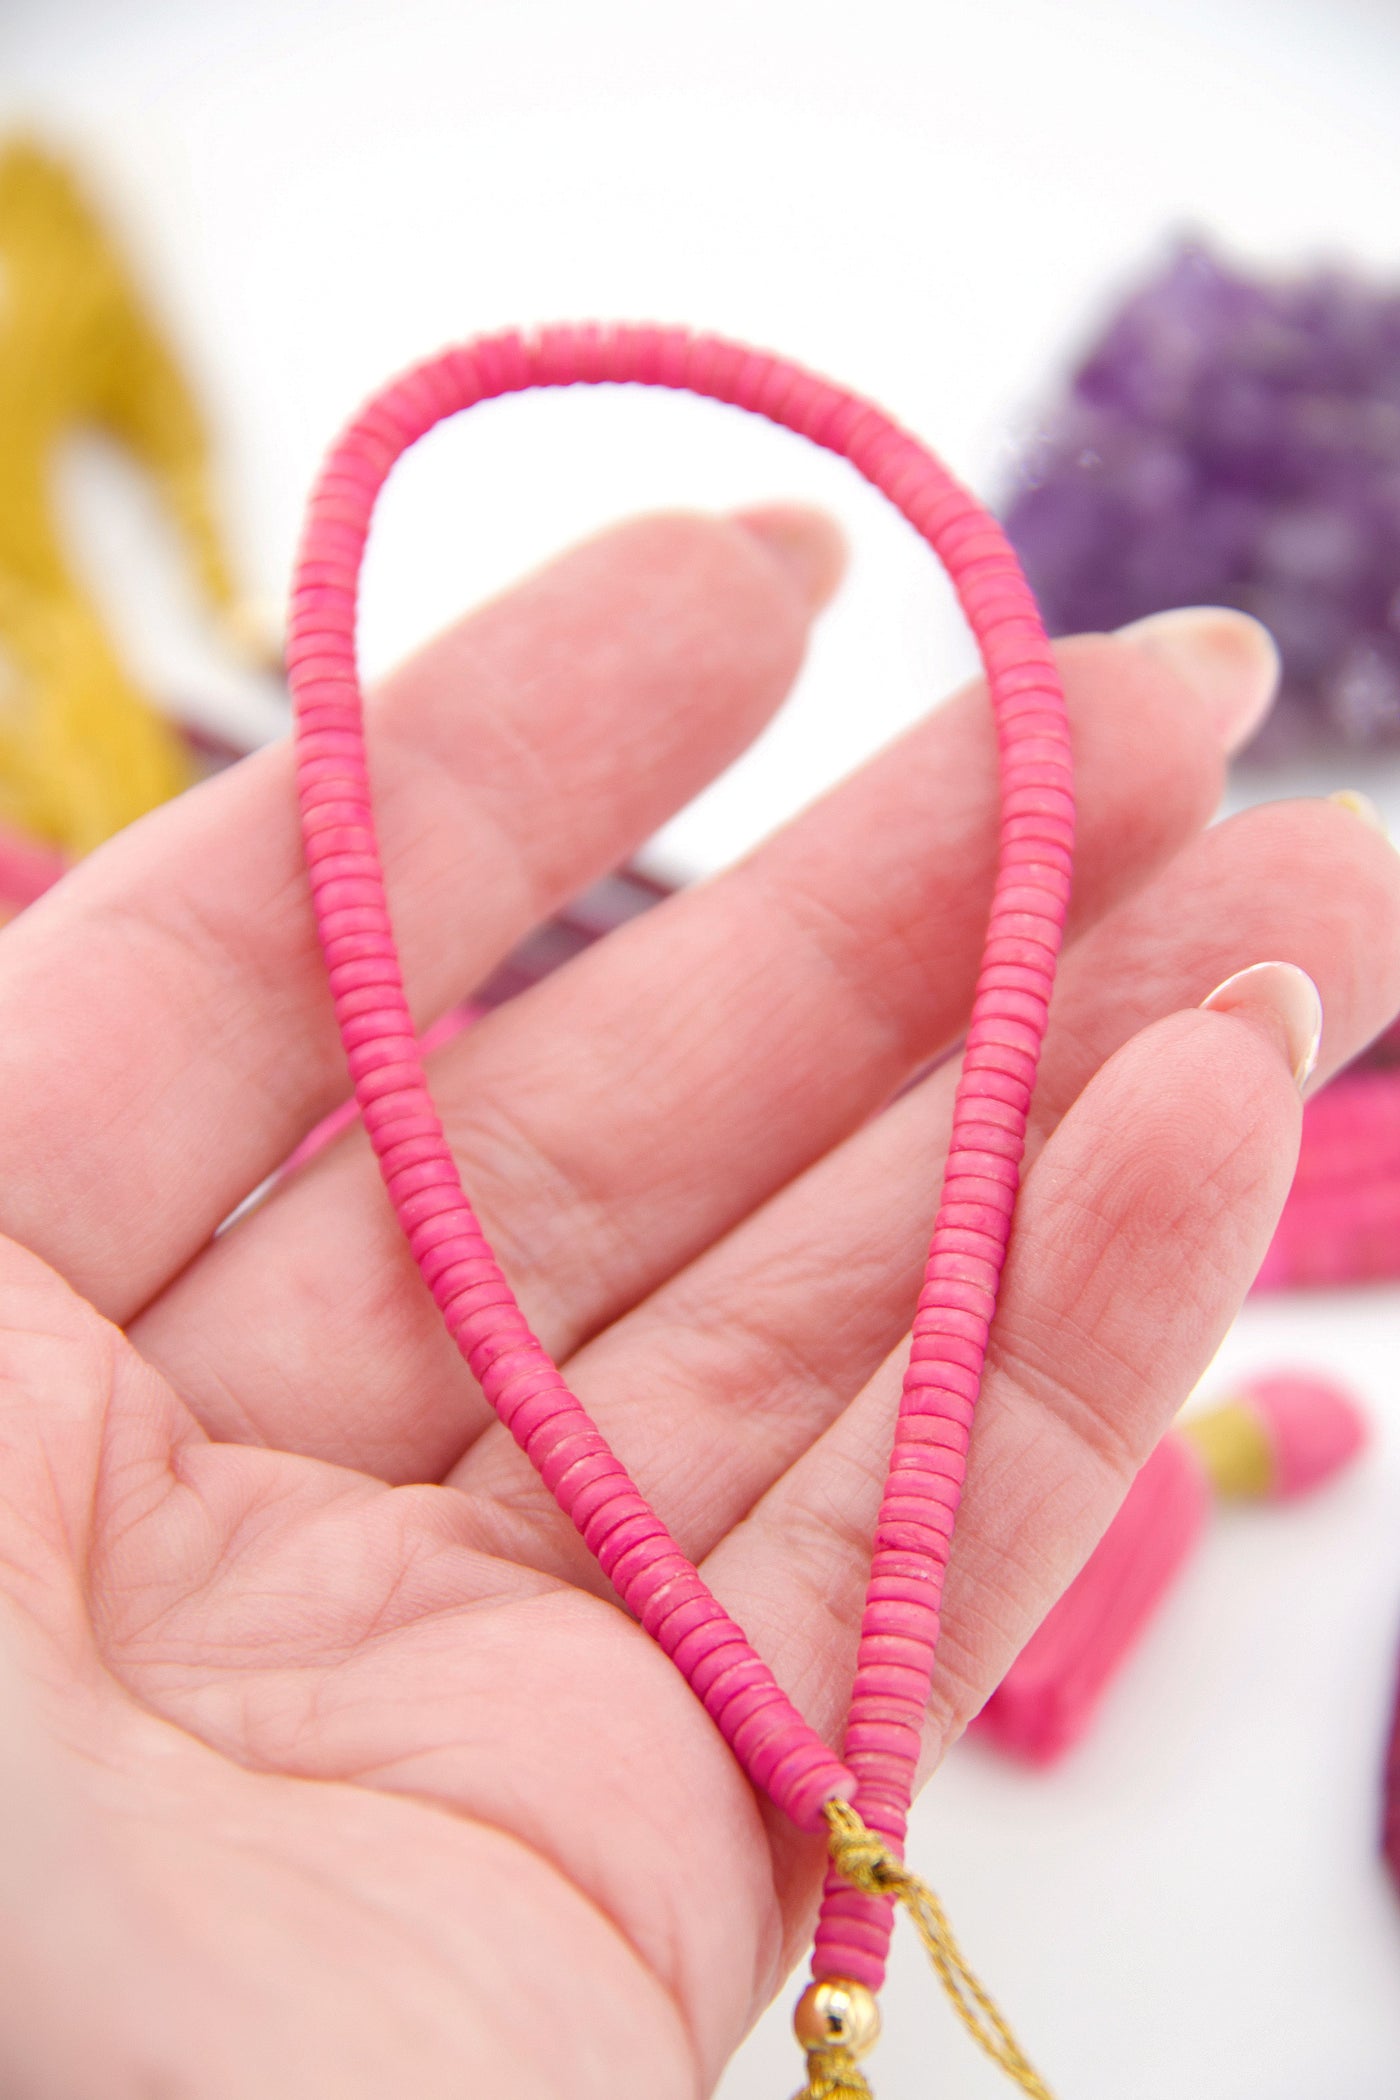 Pink Natural Spacer Beads: 4mm Heishi, Tube Shaped Beads for DIY Jewelry Handmade in India